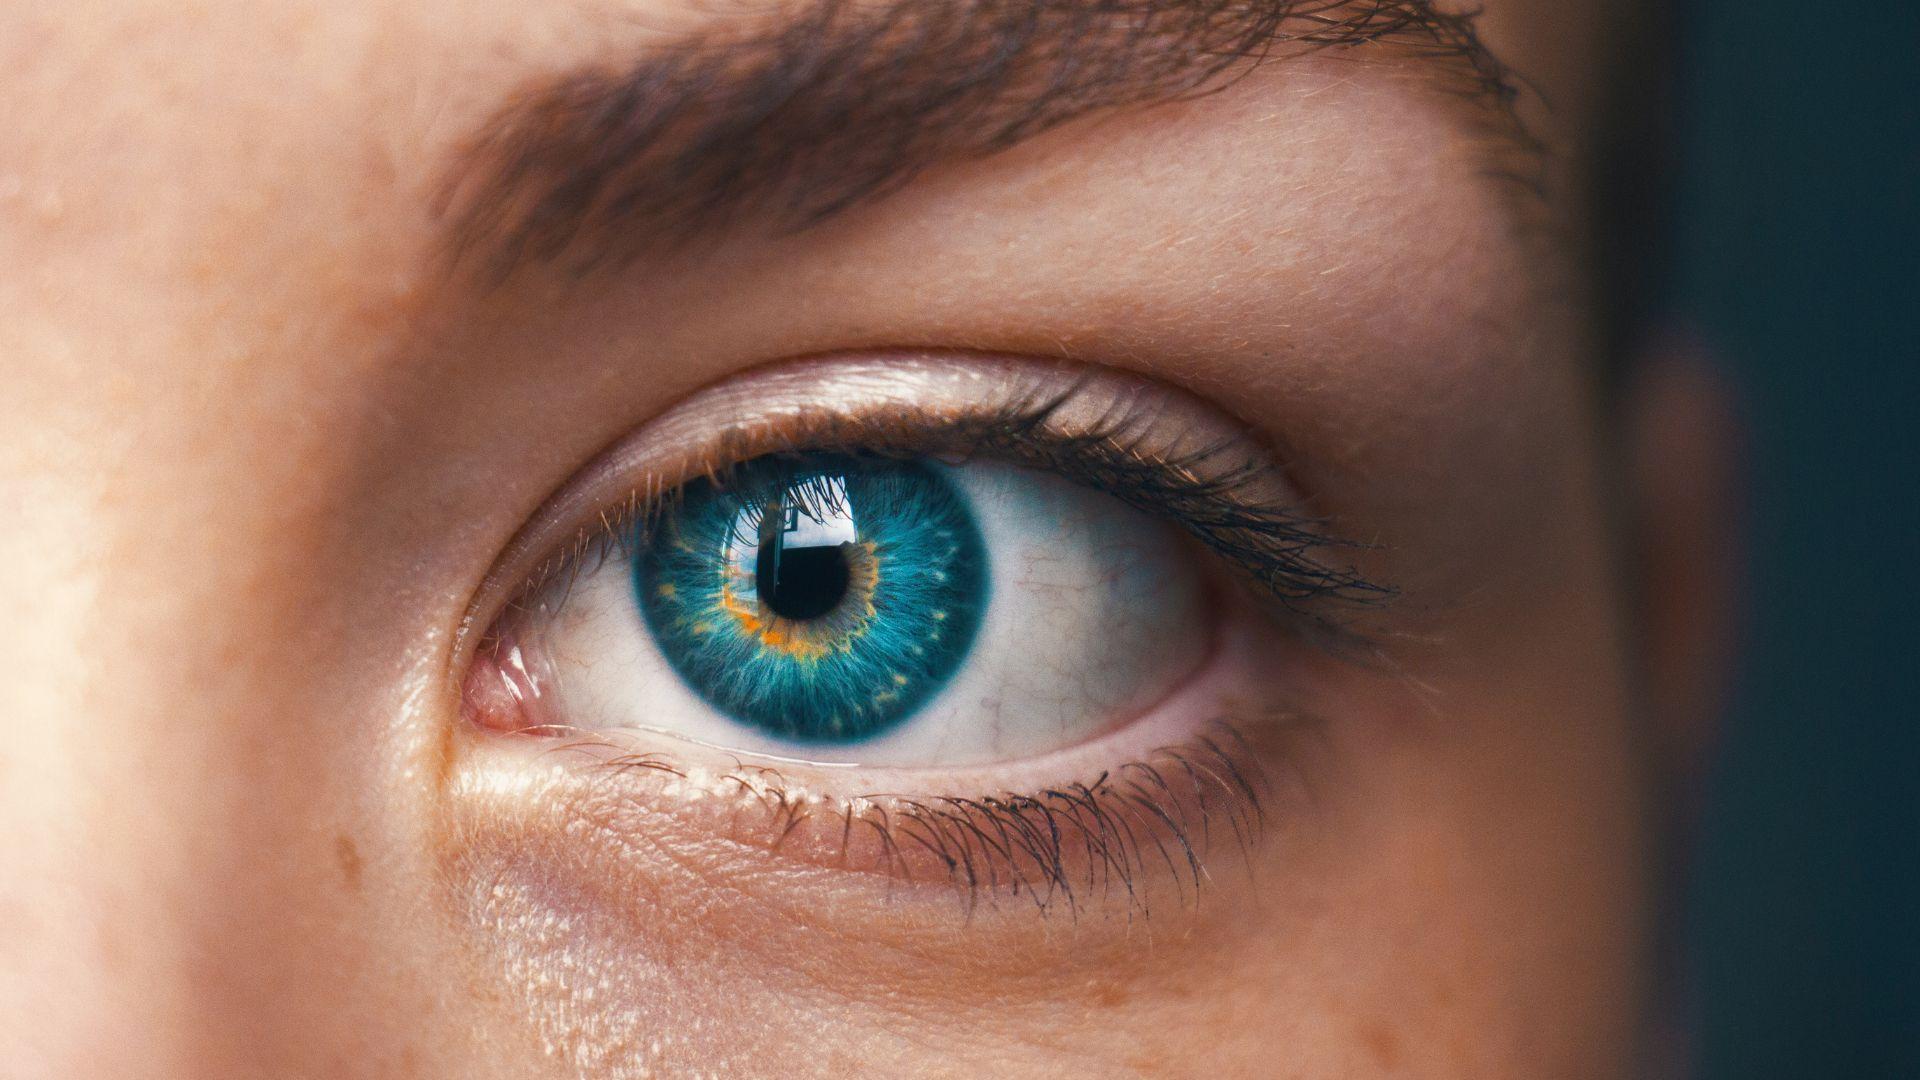 A close-up image of a person's face focusing on one eye, which has a vibrant blue iris with hints of yellow around the pupil